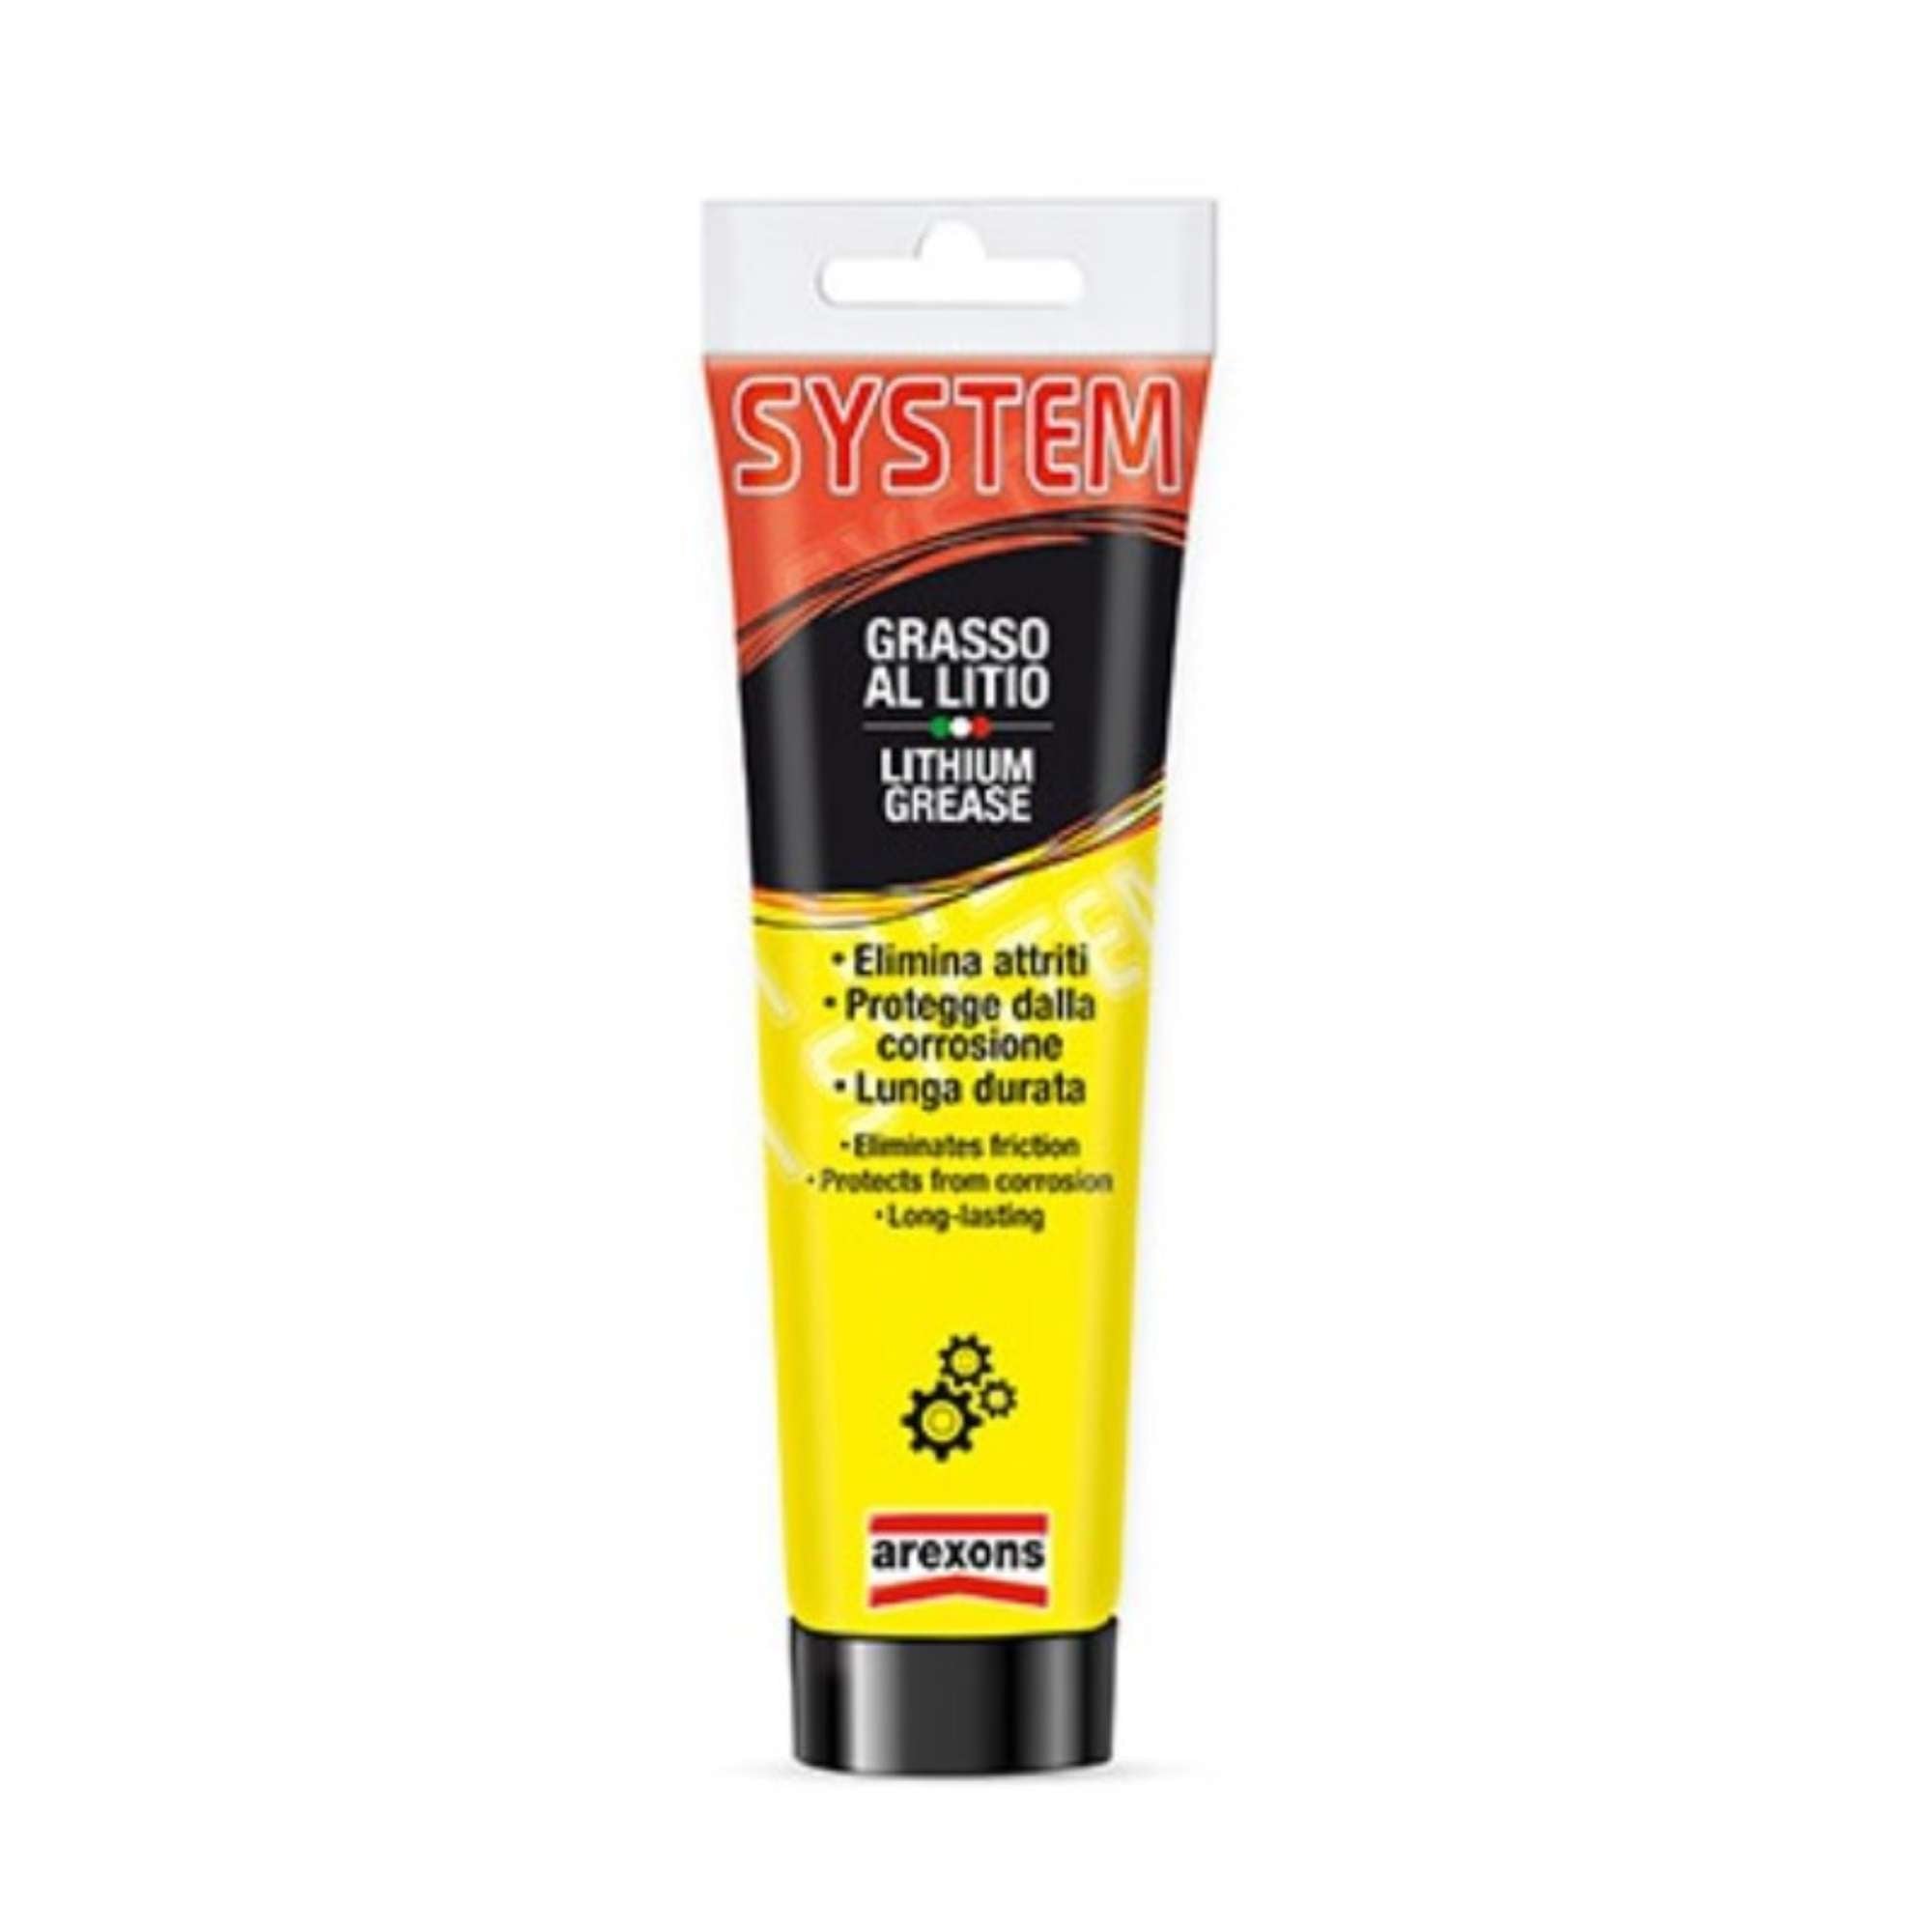 Lithium grease System tube 100ml - Arexons 9806